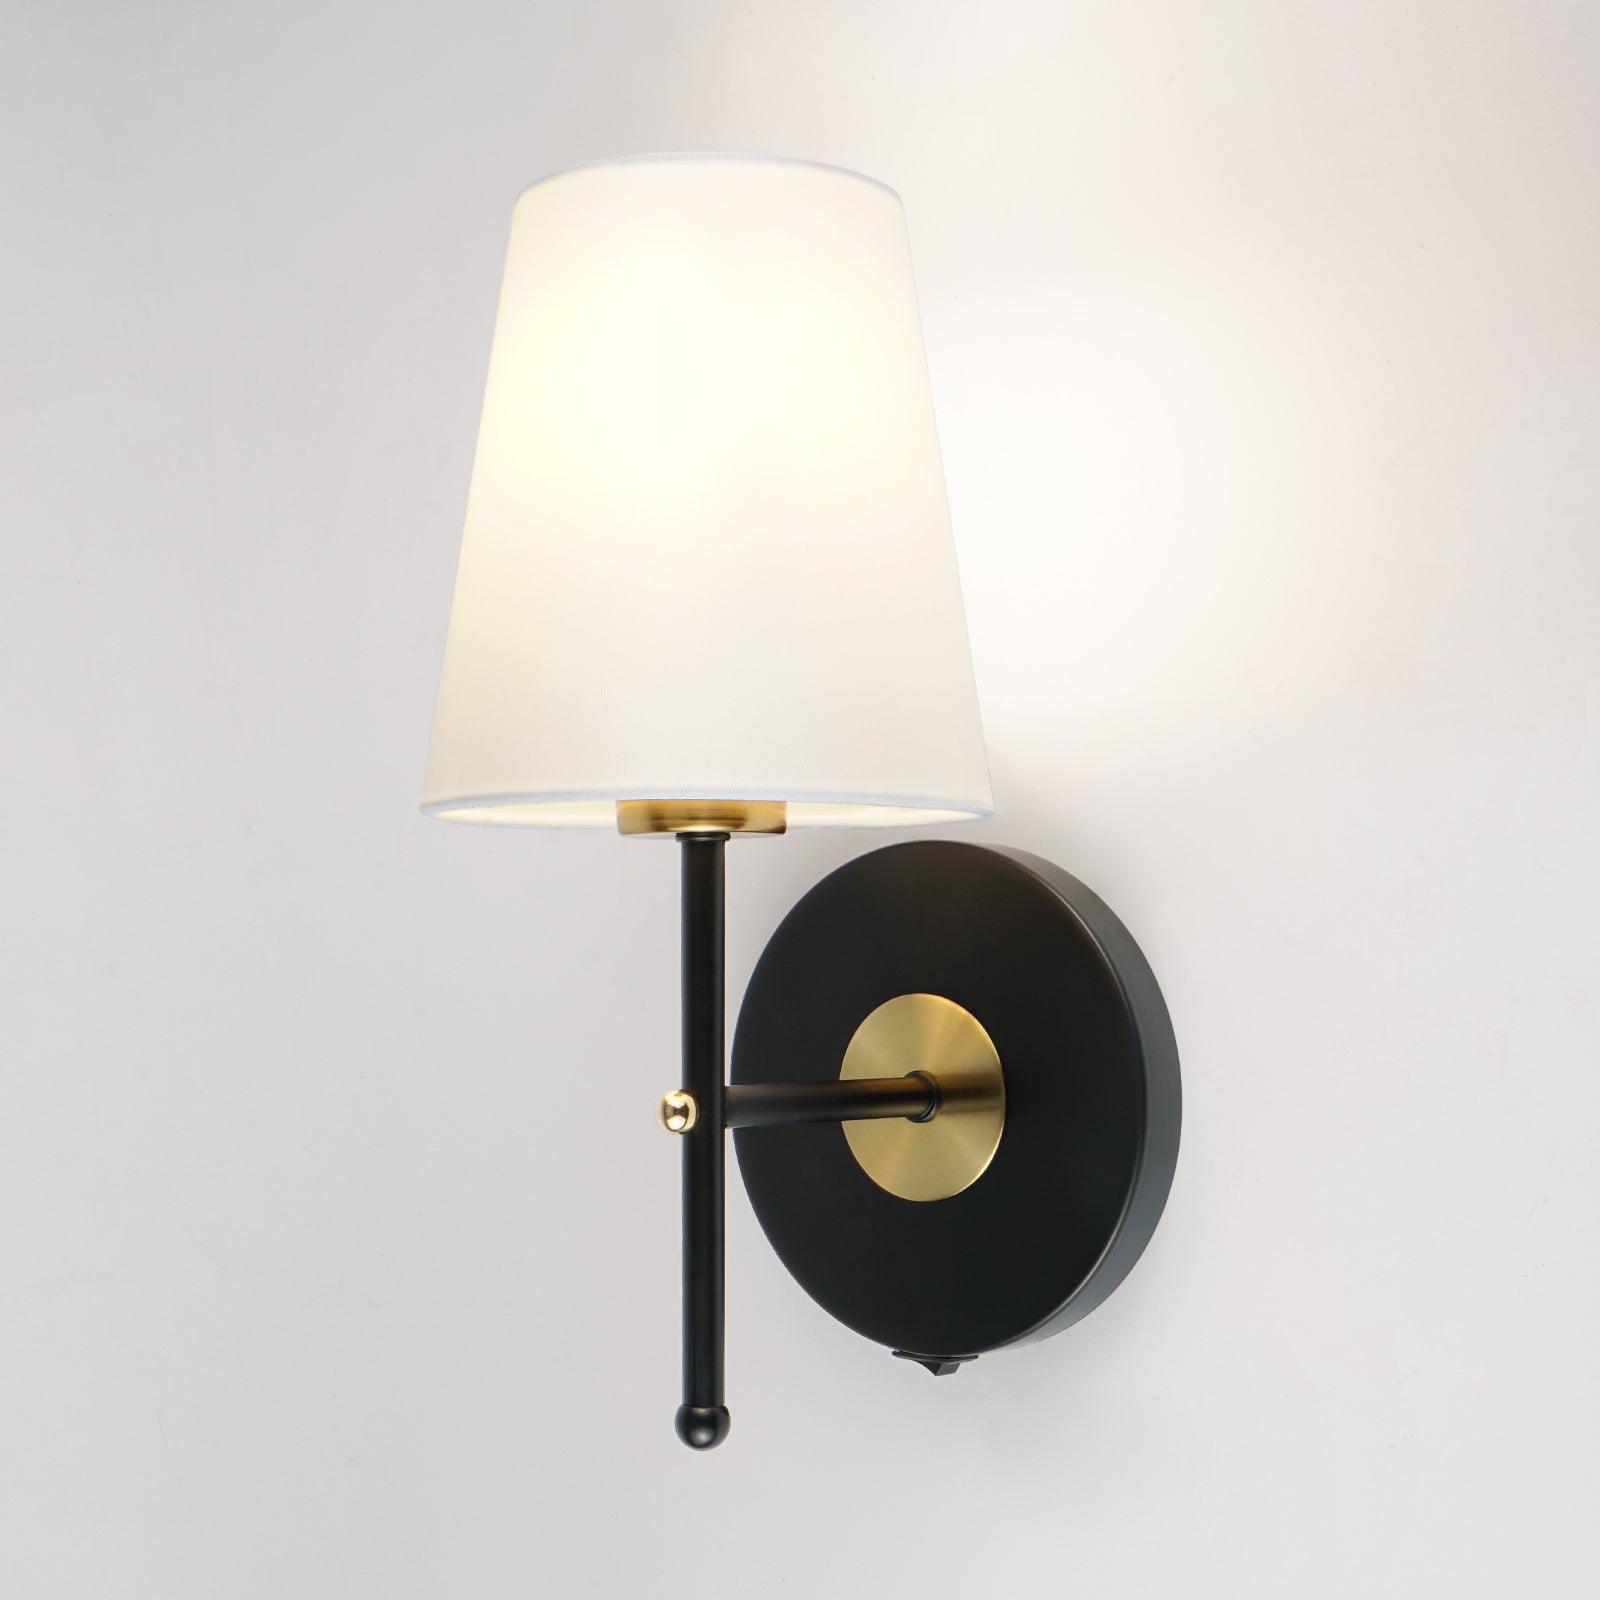 C01 Battery Operated Wall Sconces with Fabric Shade Wireless for Bedroom